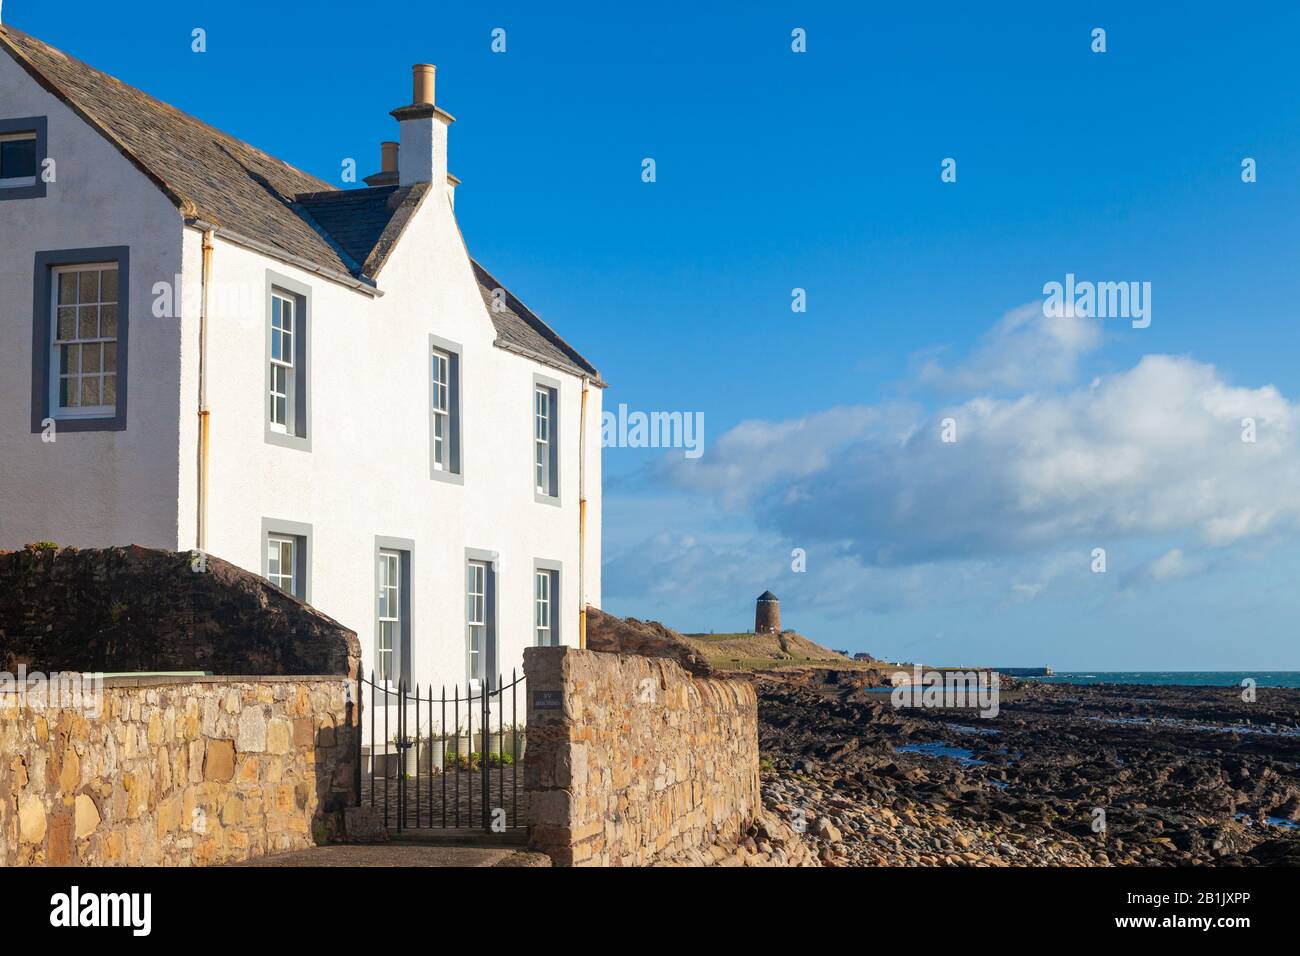 Traditional Fife house along the Fife Coastal Path with the windmill in the background, St Monans Fife Scotland. Stock Photo